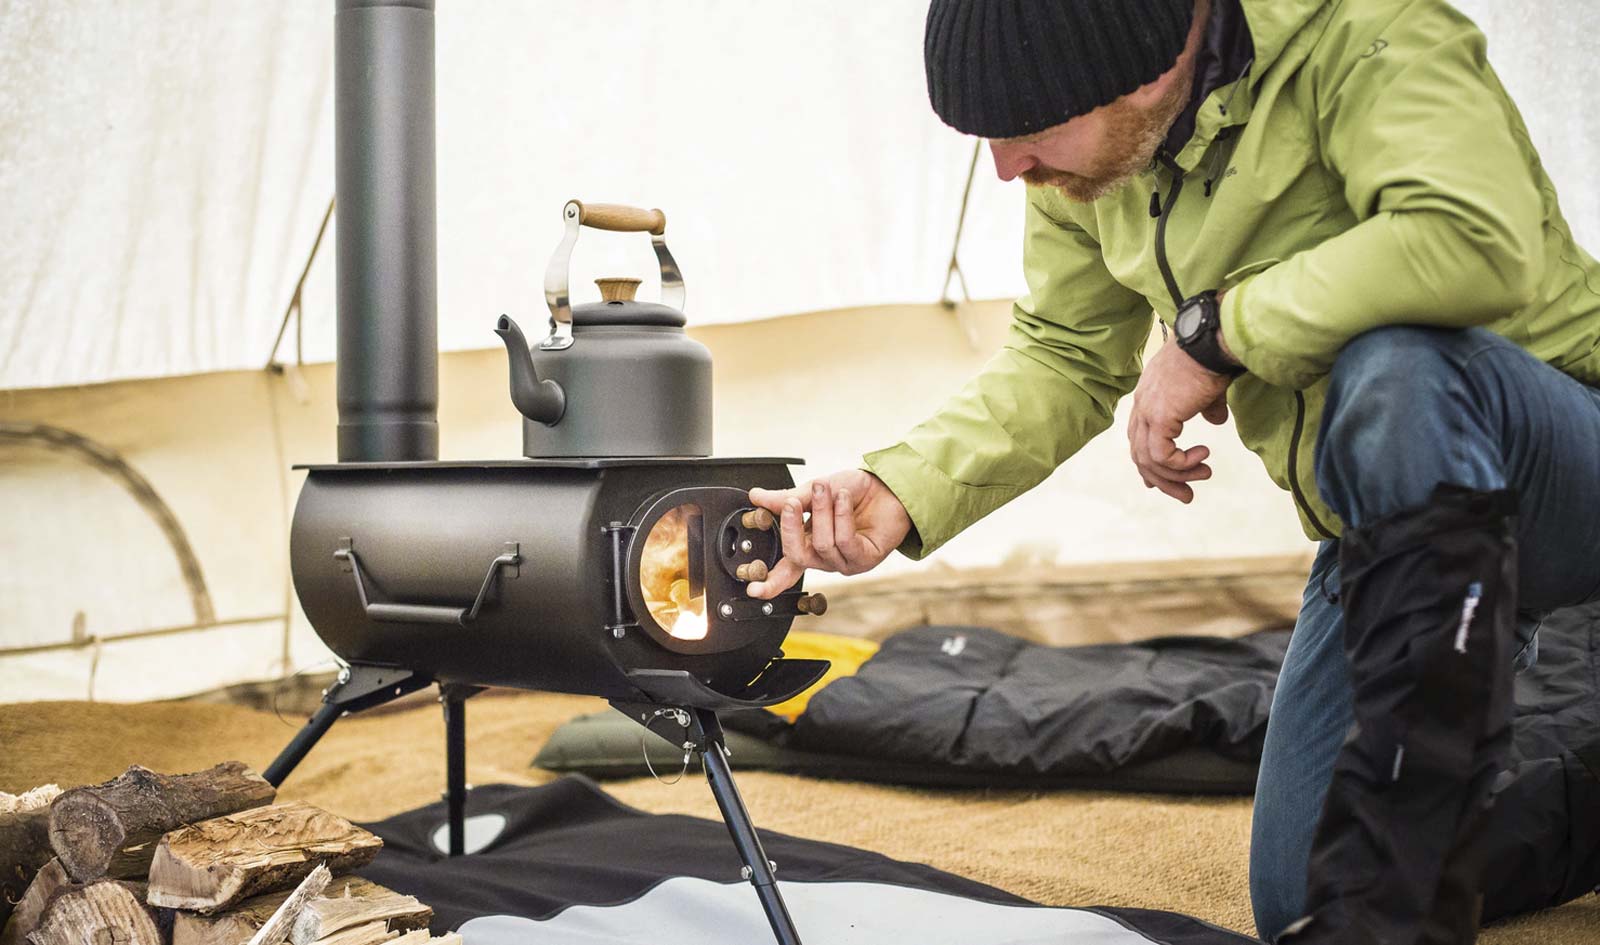 Outdoor wood fire Stove for Glamping